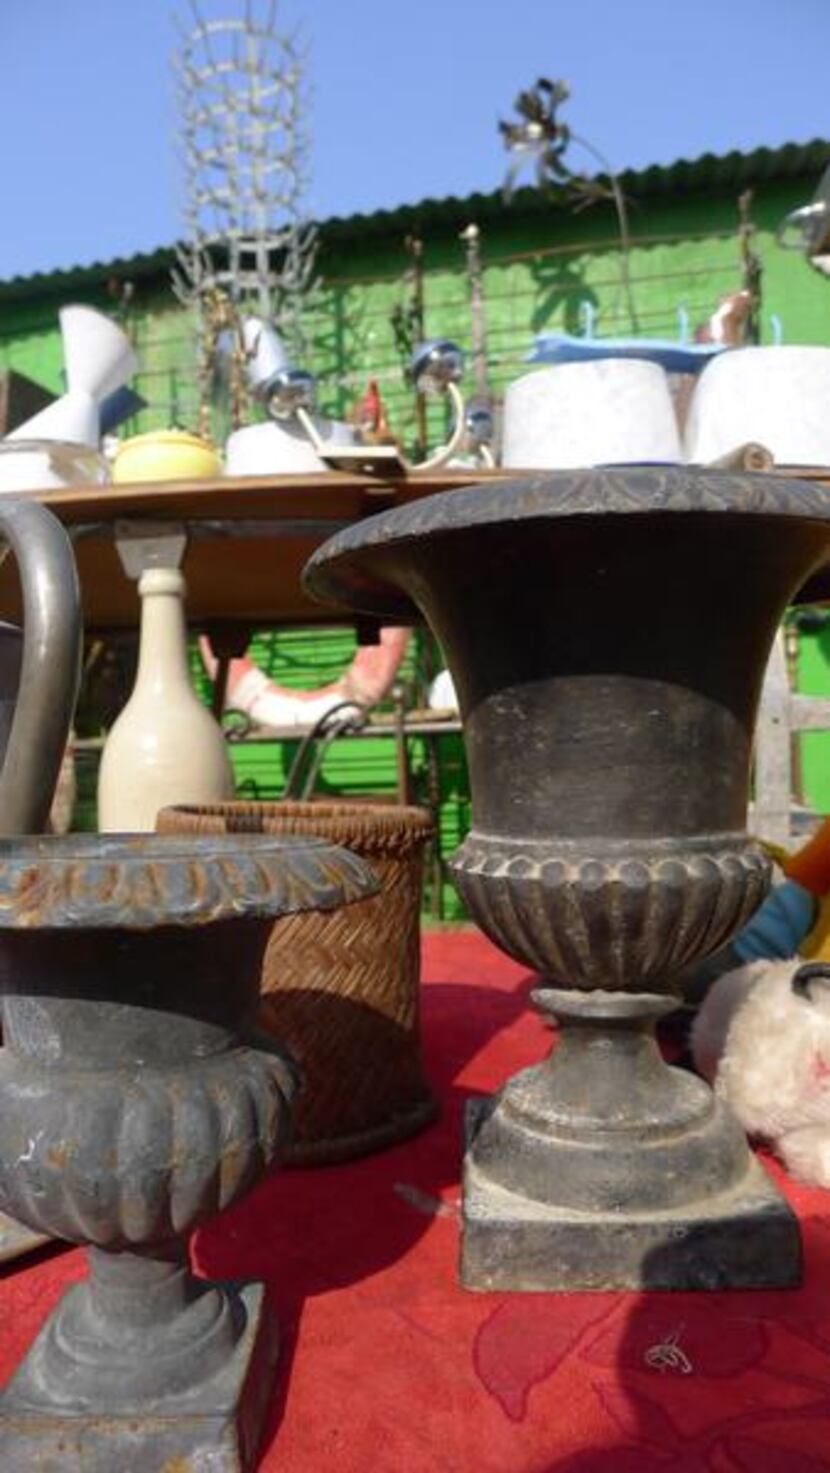 
Foire de Chatou, Paris, France - Medici vases Trs shabby chic, made of steel and often with...